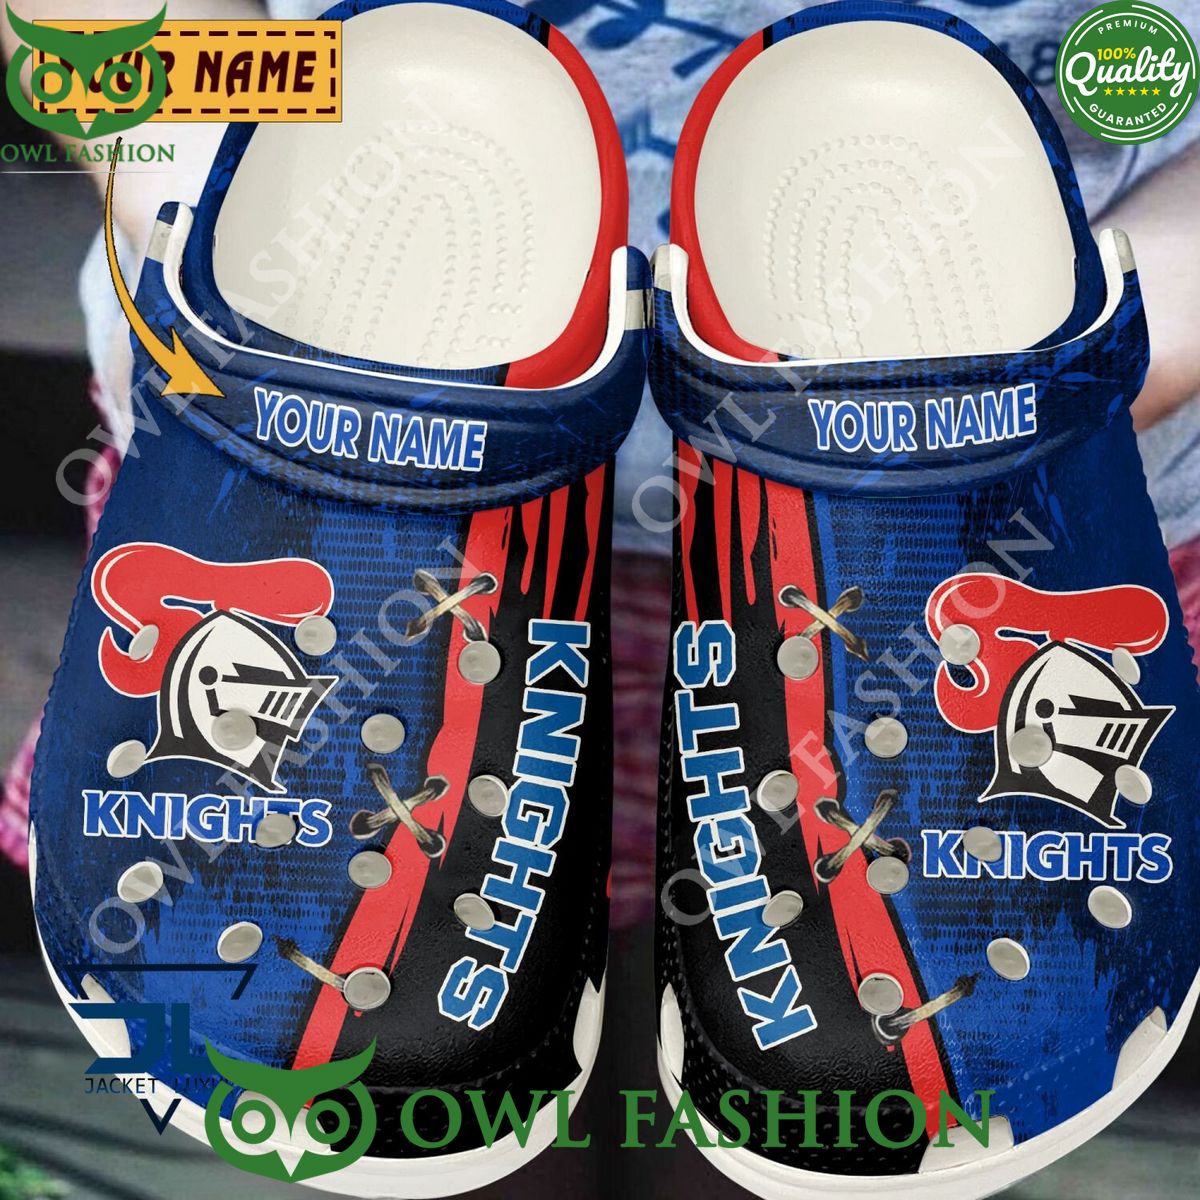 newcastle knights personalized rugby league crocs 1 5nwZk.jpg